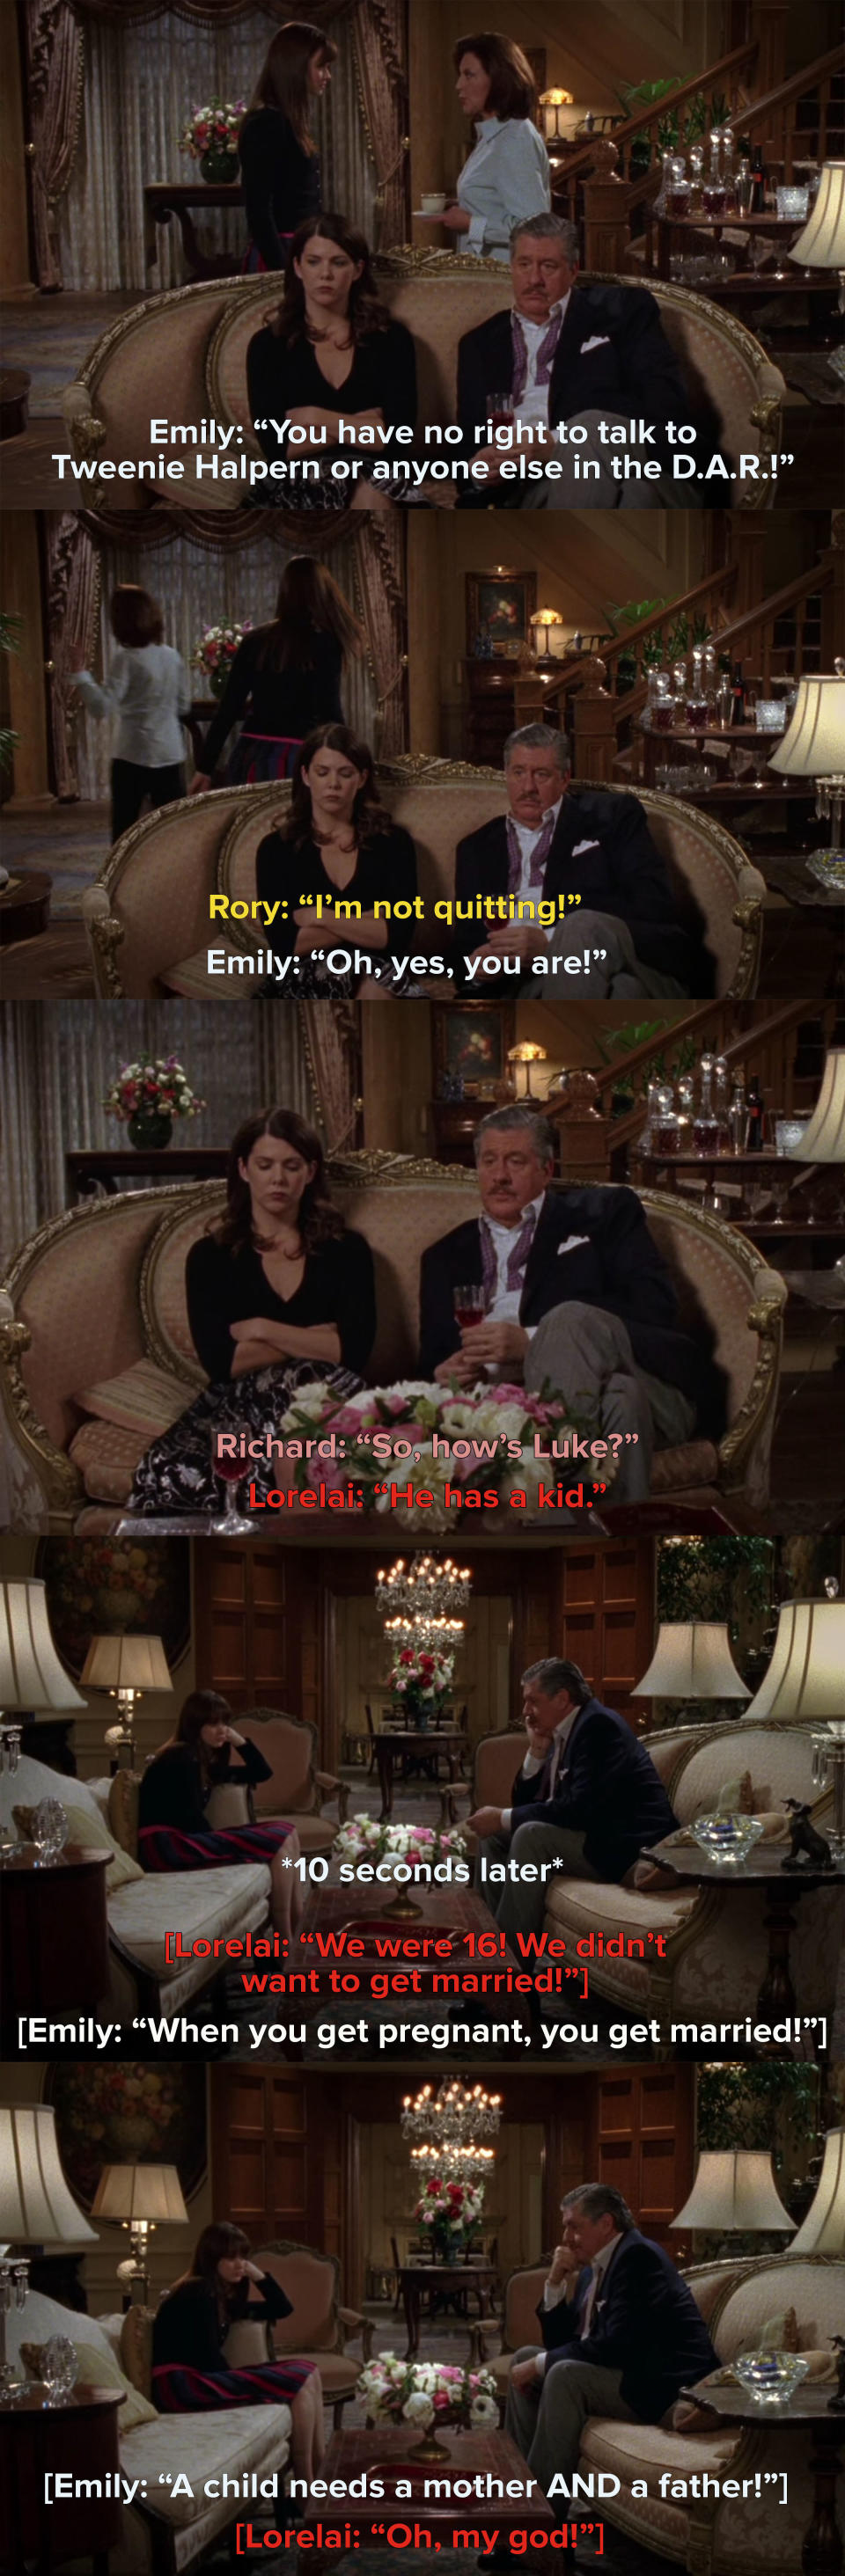 Rory fights with Emily about the D.A.R., Lorelai tells Richard Luke has a kid, Lorelai and Emily fight about her not marrying Christopher when she got pregnant with Rory